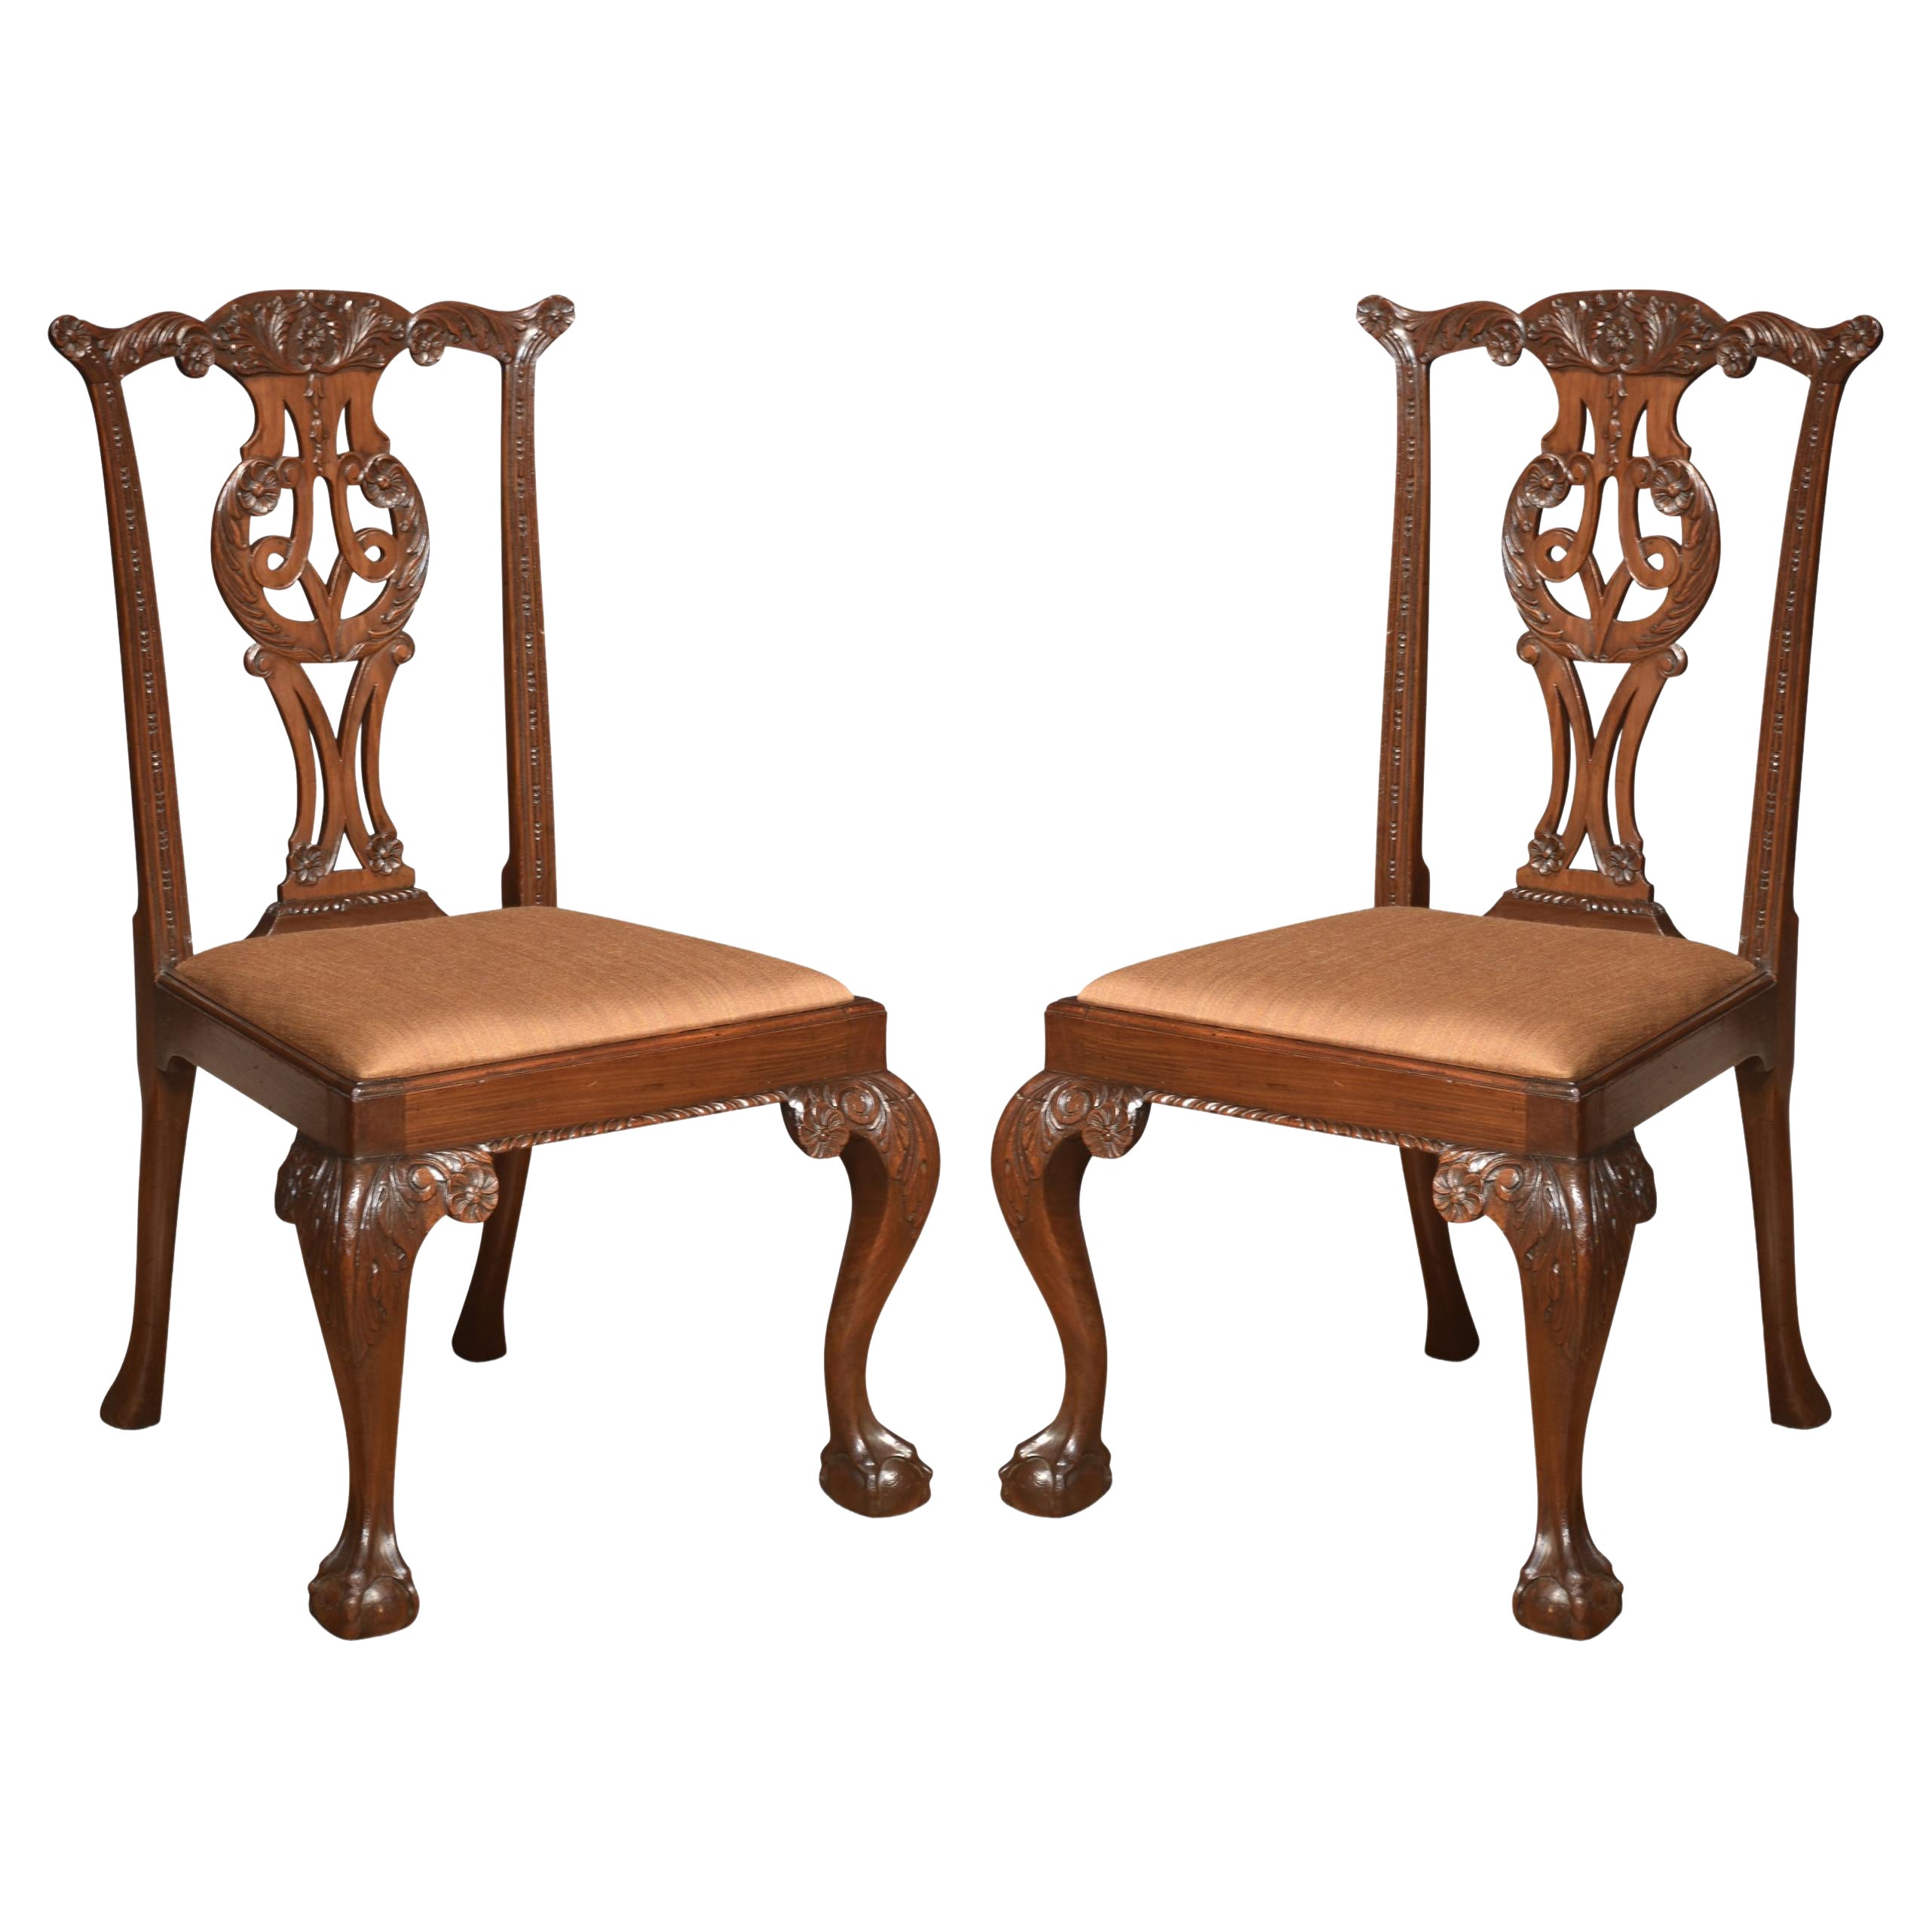 Pair of Chippendale Revival Side Chairs